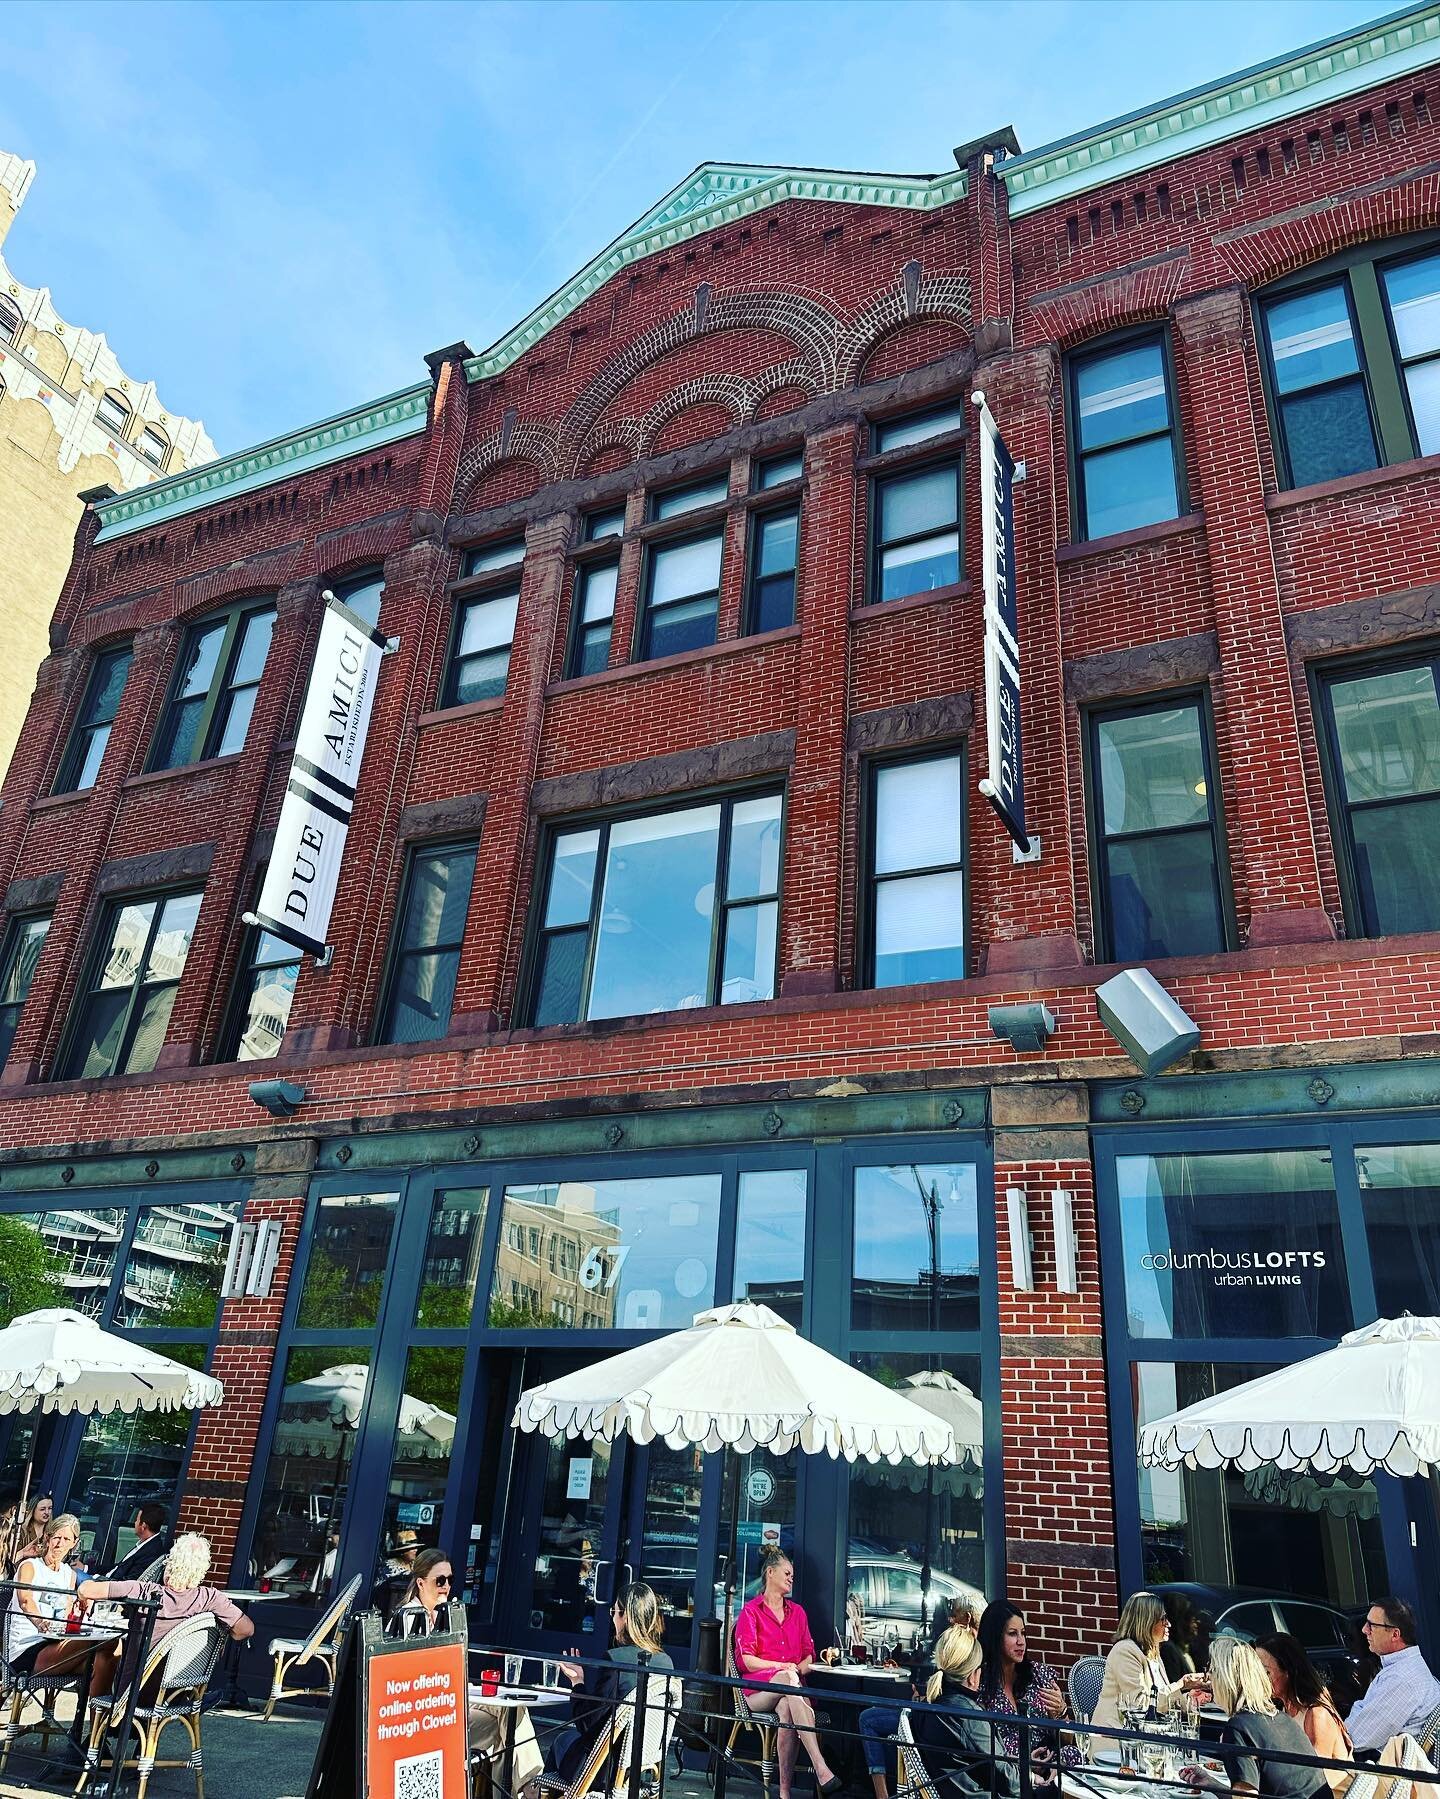 Can&rsquo;t get enough of these patio days! 

Join us for happy hour and dinner before heading to the show. 

&bull;
&bull;
&bull;
&bull;
&bull;
&bull;
#dueamici #downtowncolumbus #happyhour #dinner #italian #pasta #theatre #wine #cocktails #cbusohio